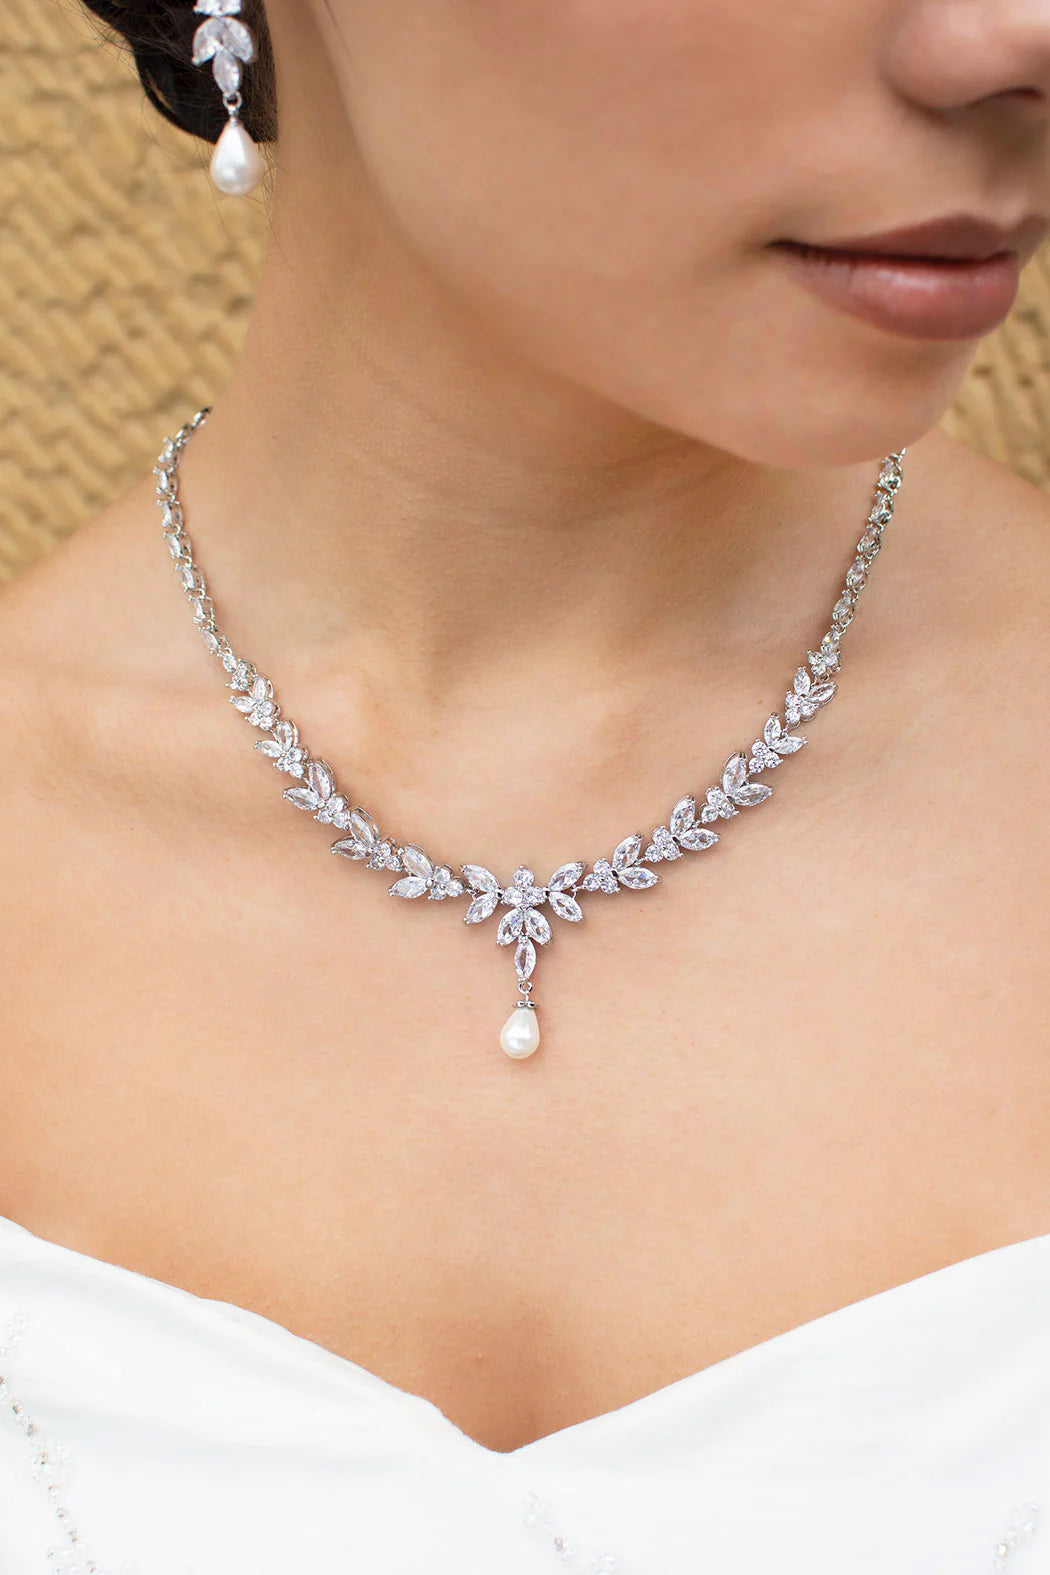 Courtney Pearl  - Statement Crystal and Pearl Bridal Necklace